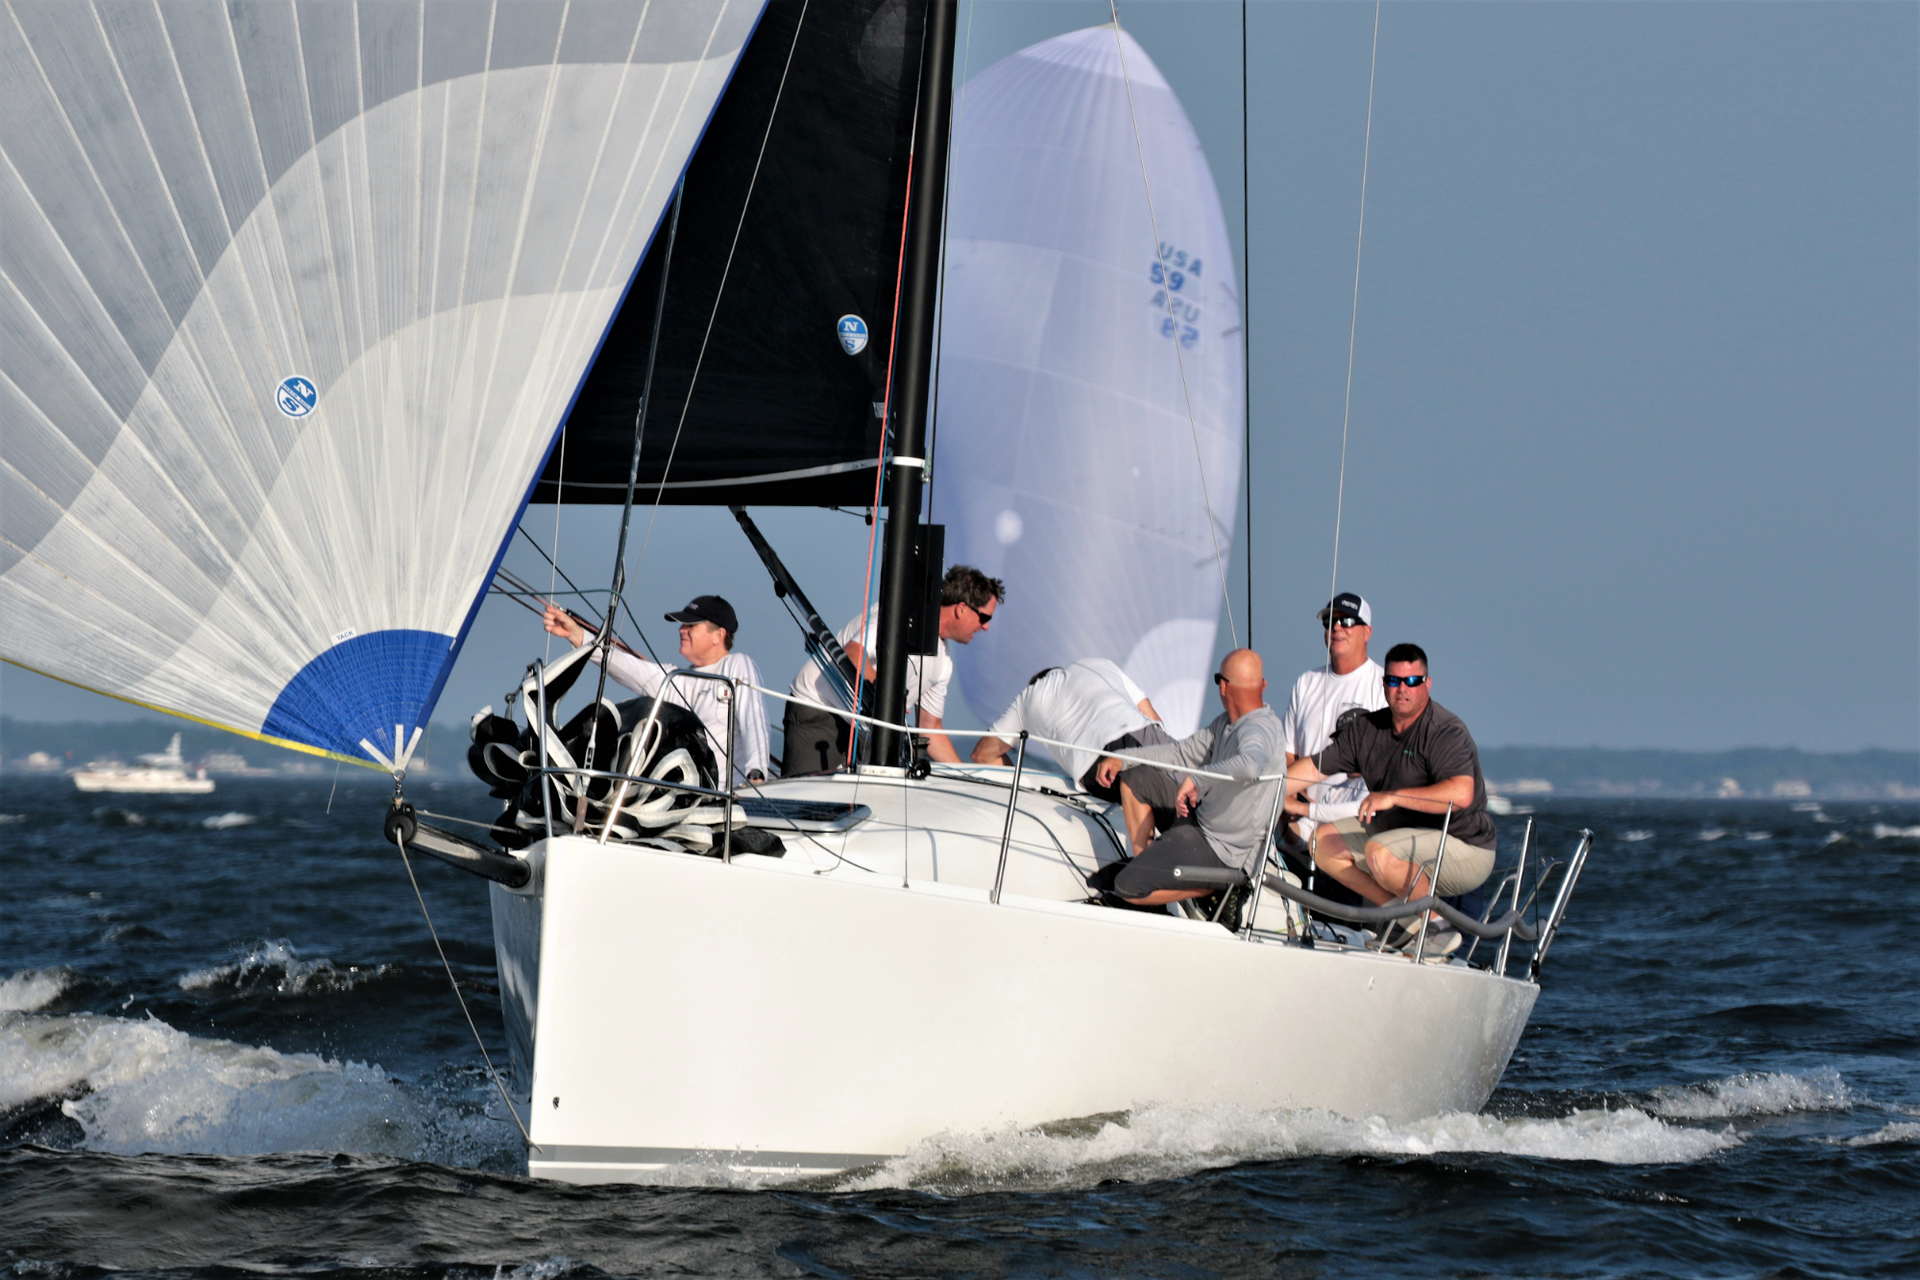 SAILING IS BACK IN ANNAPOLIS